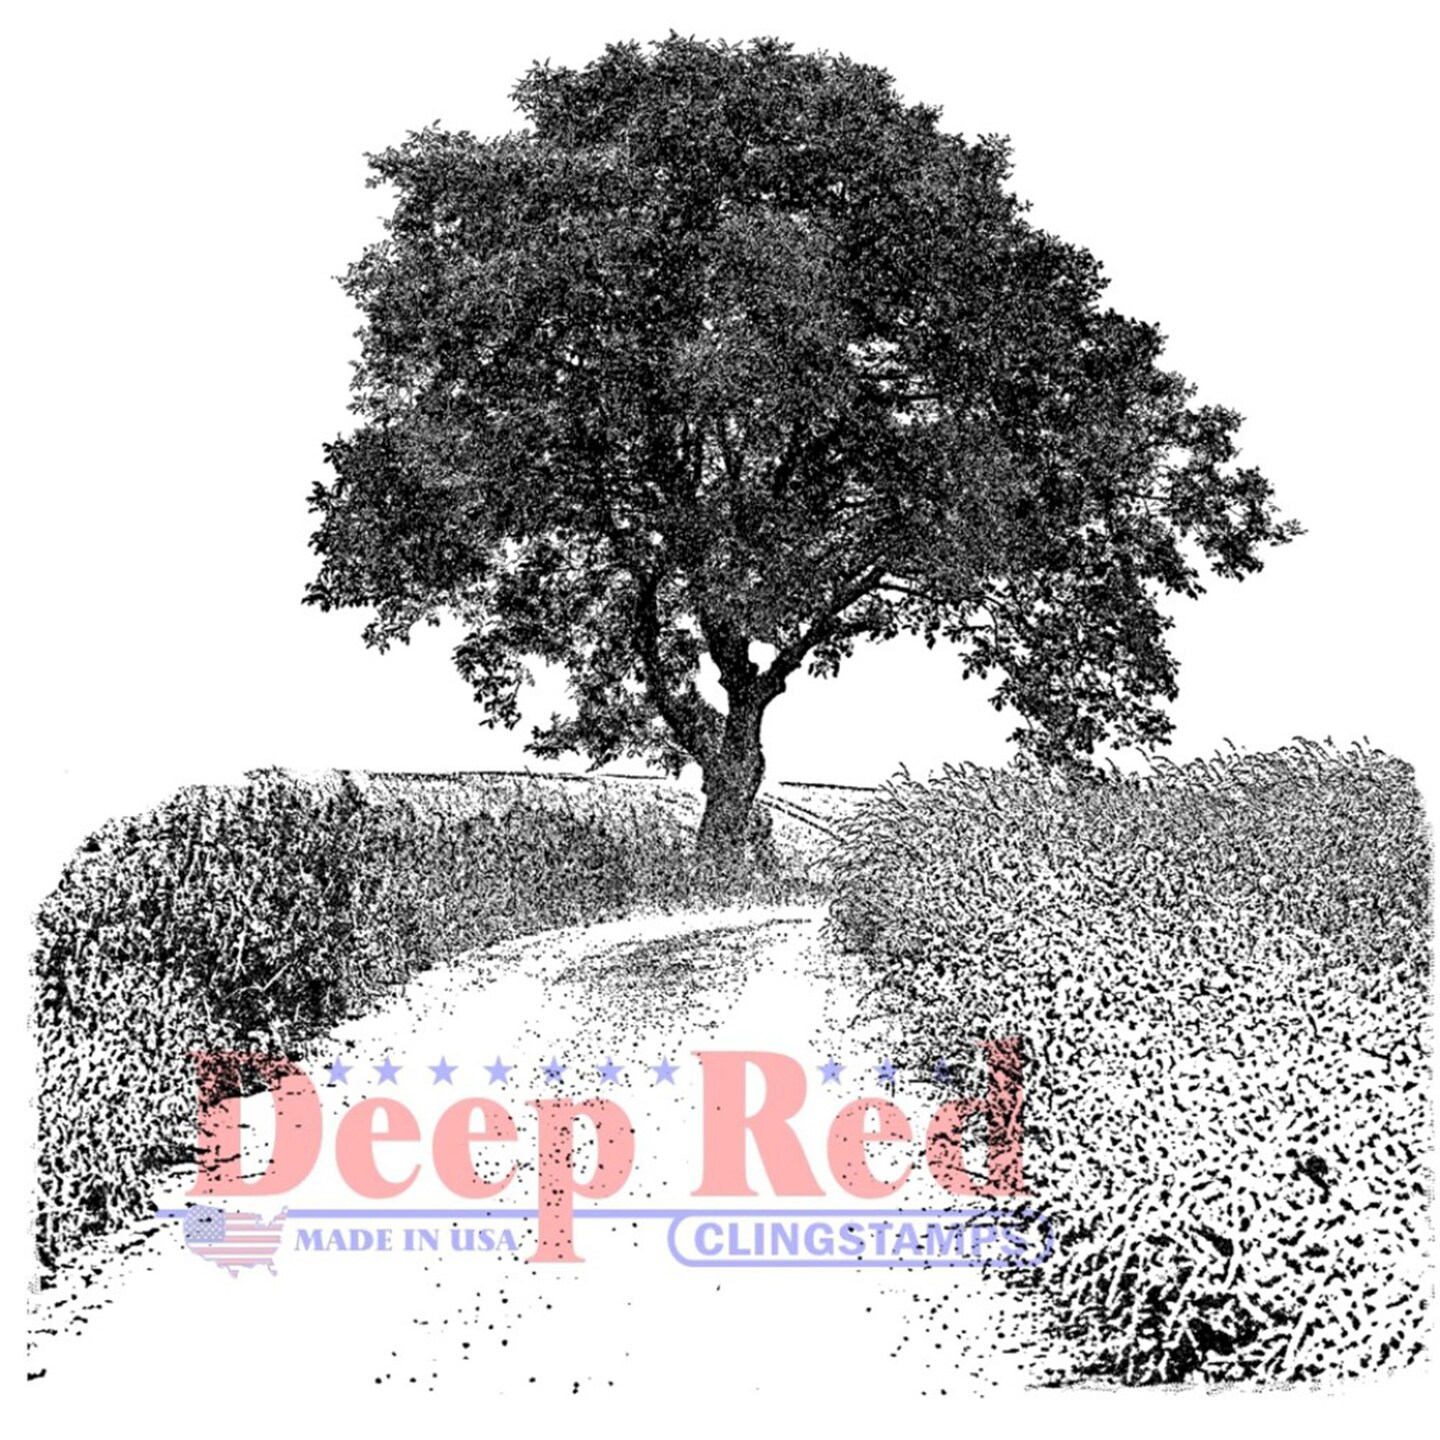 Deep Red Stamps Country Road Rubber Cling Stamp 3 x 3.1 inches